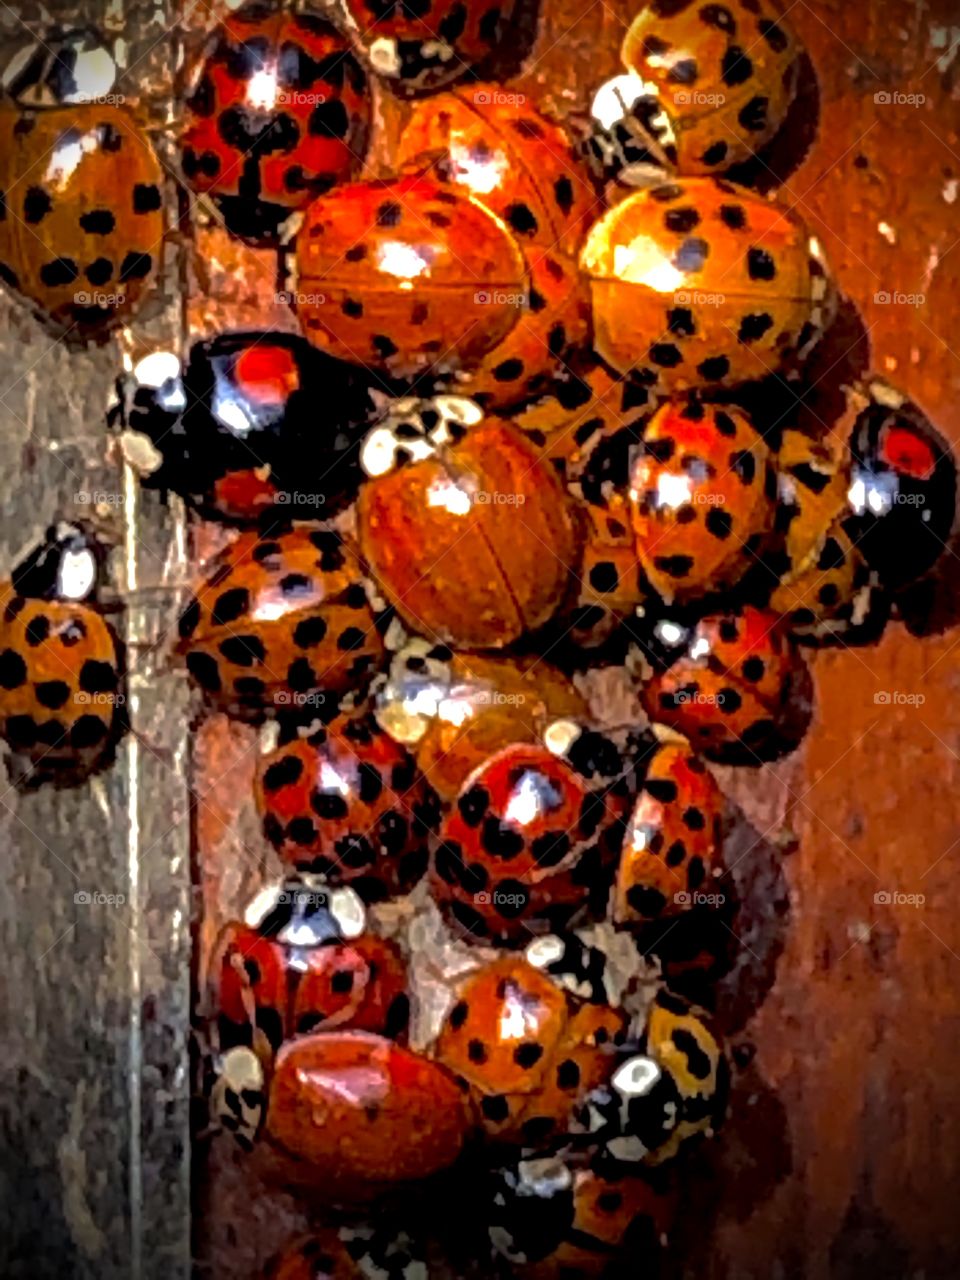 ladybugs - Gathering in the greenhouse and everyone is unique - just like us humans